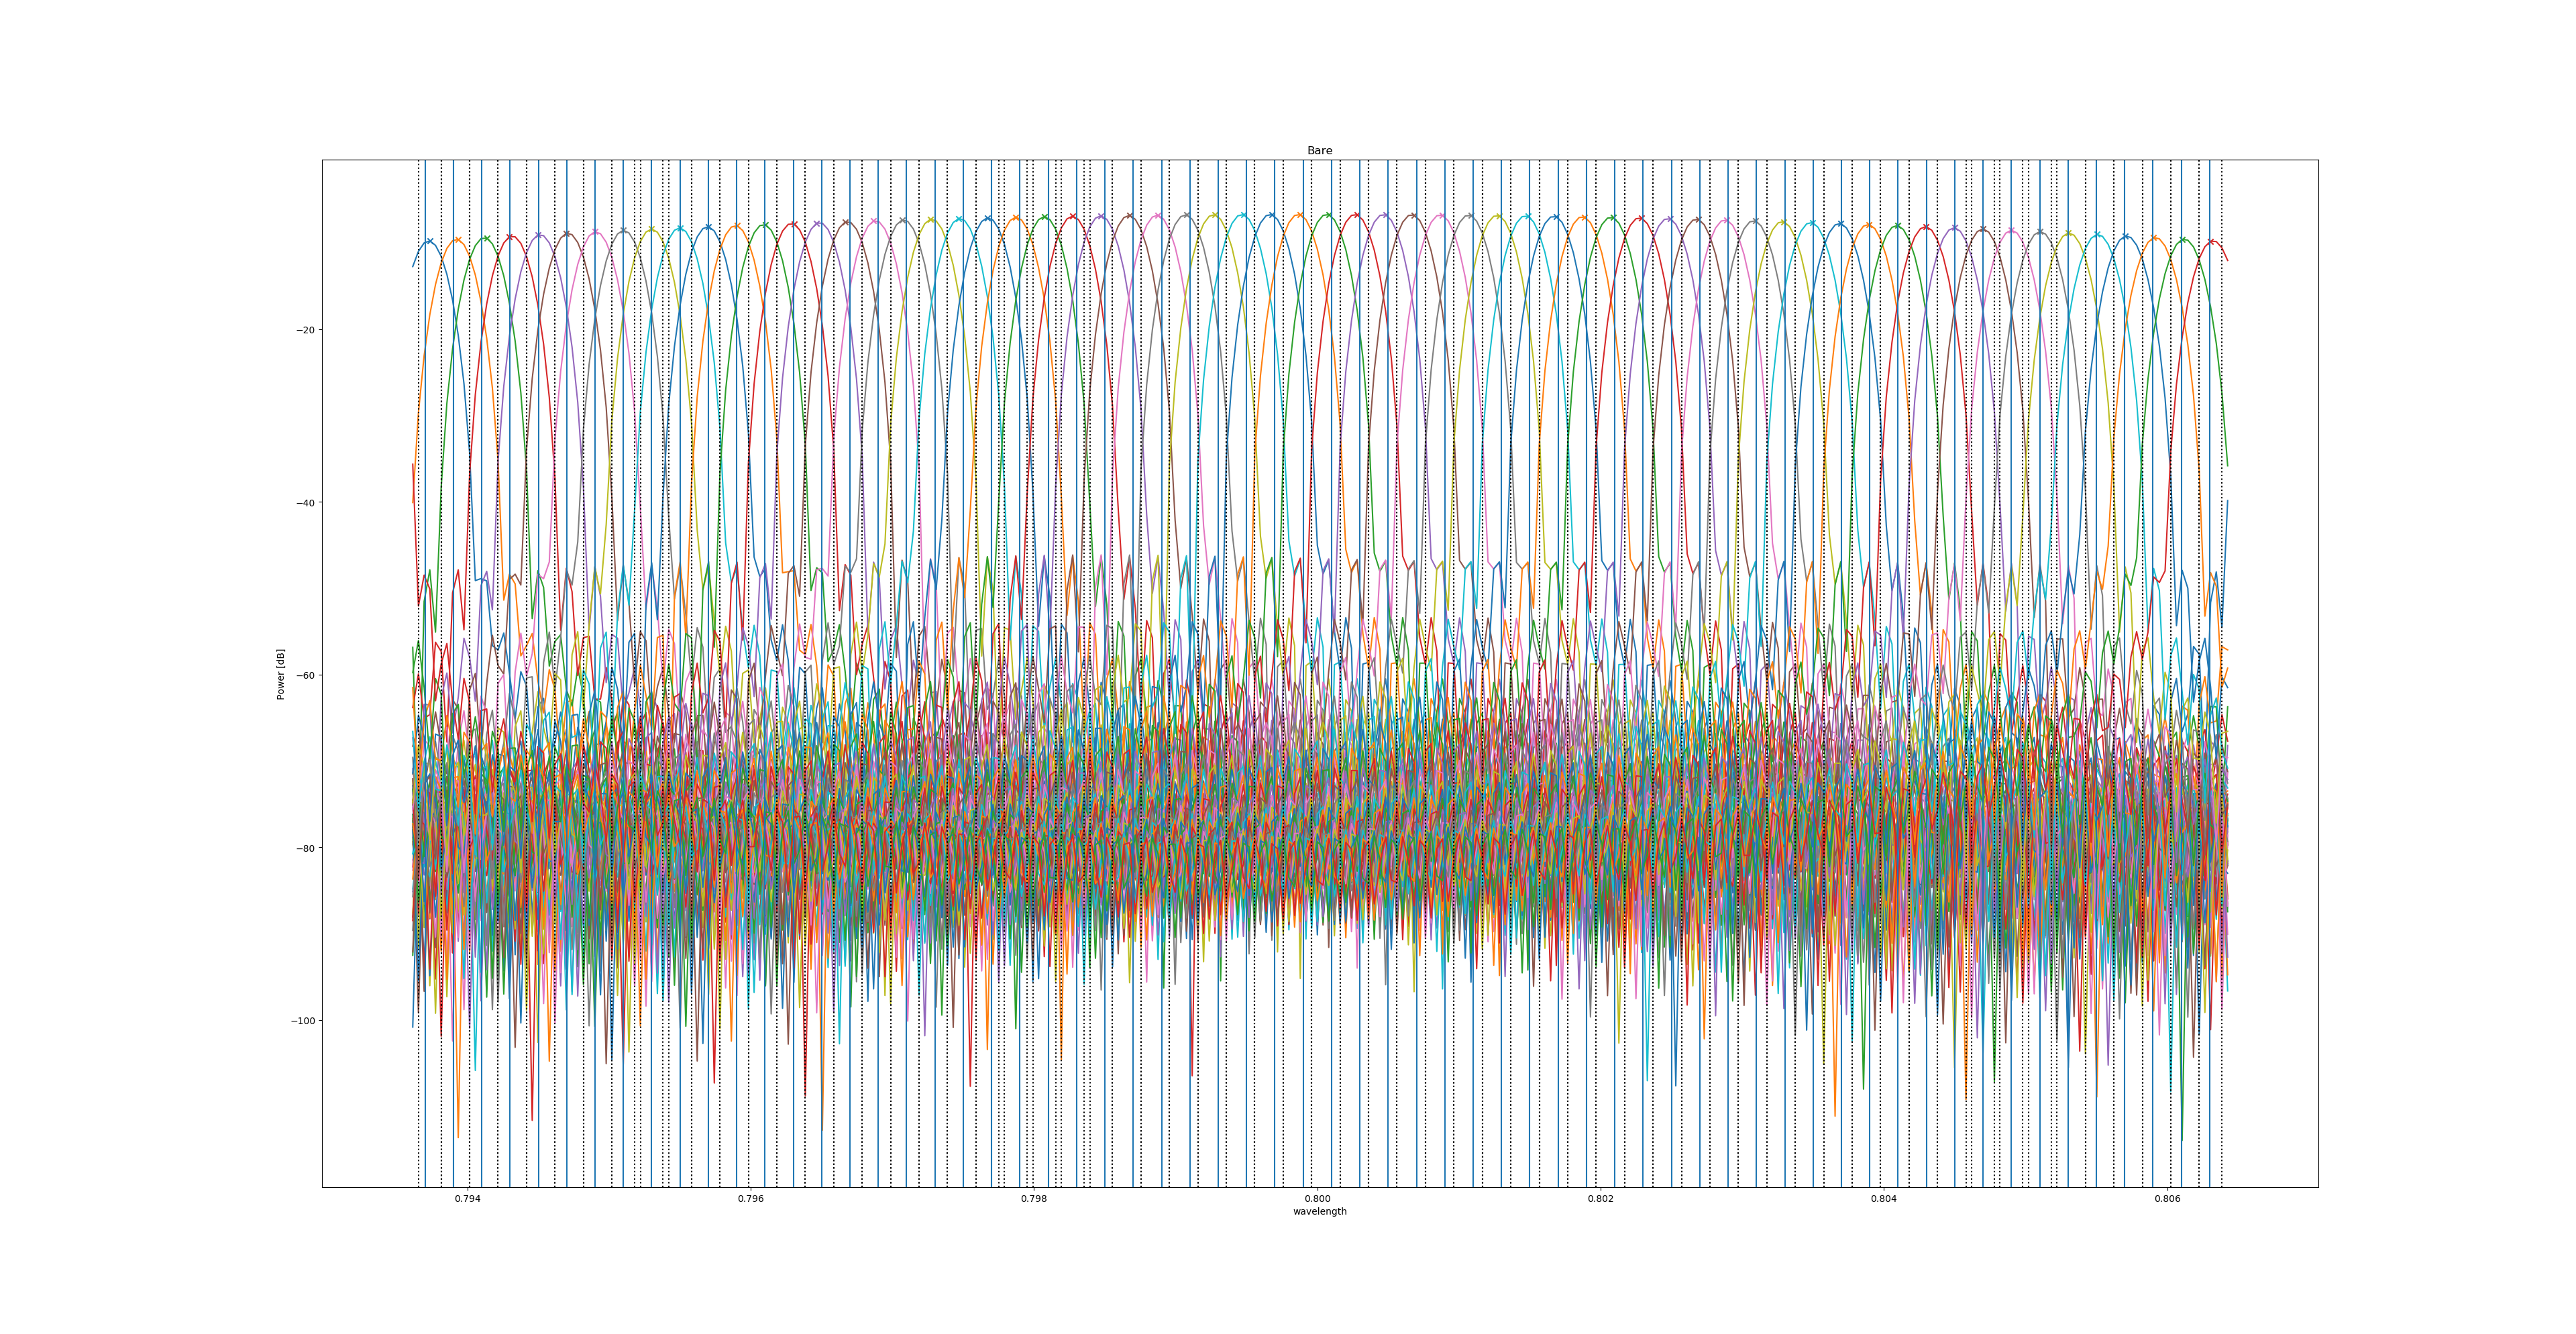 ../../../_images/output_spectrum.png